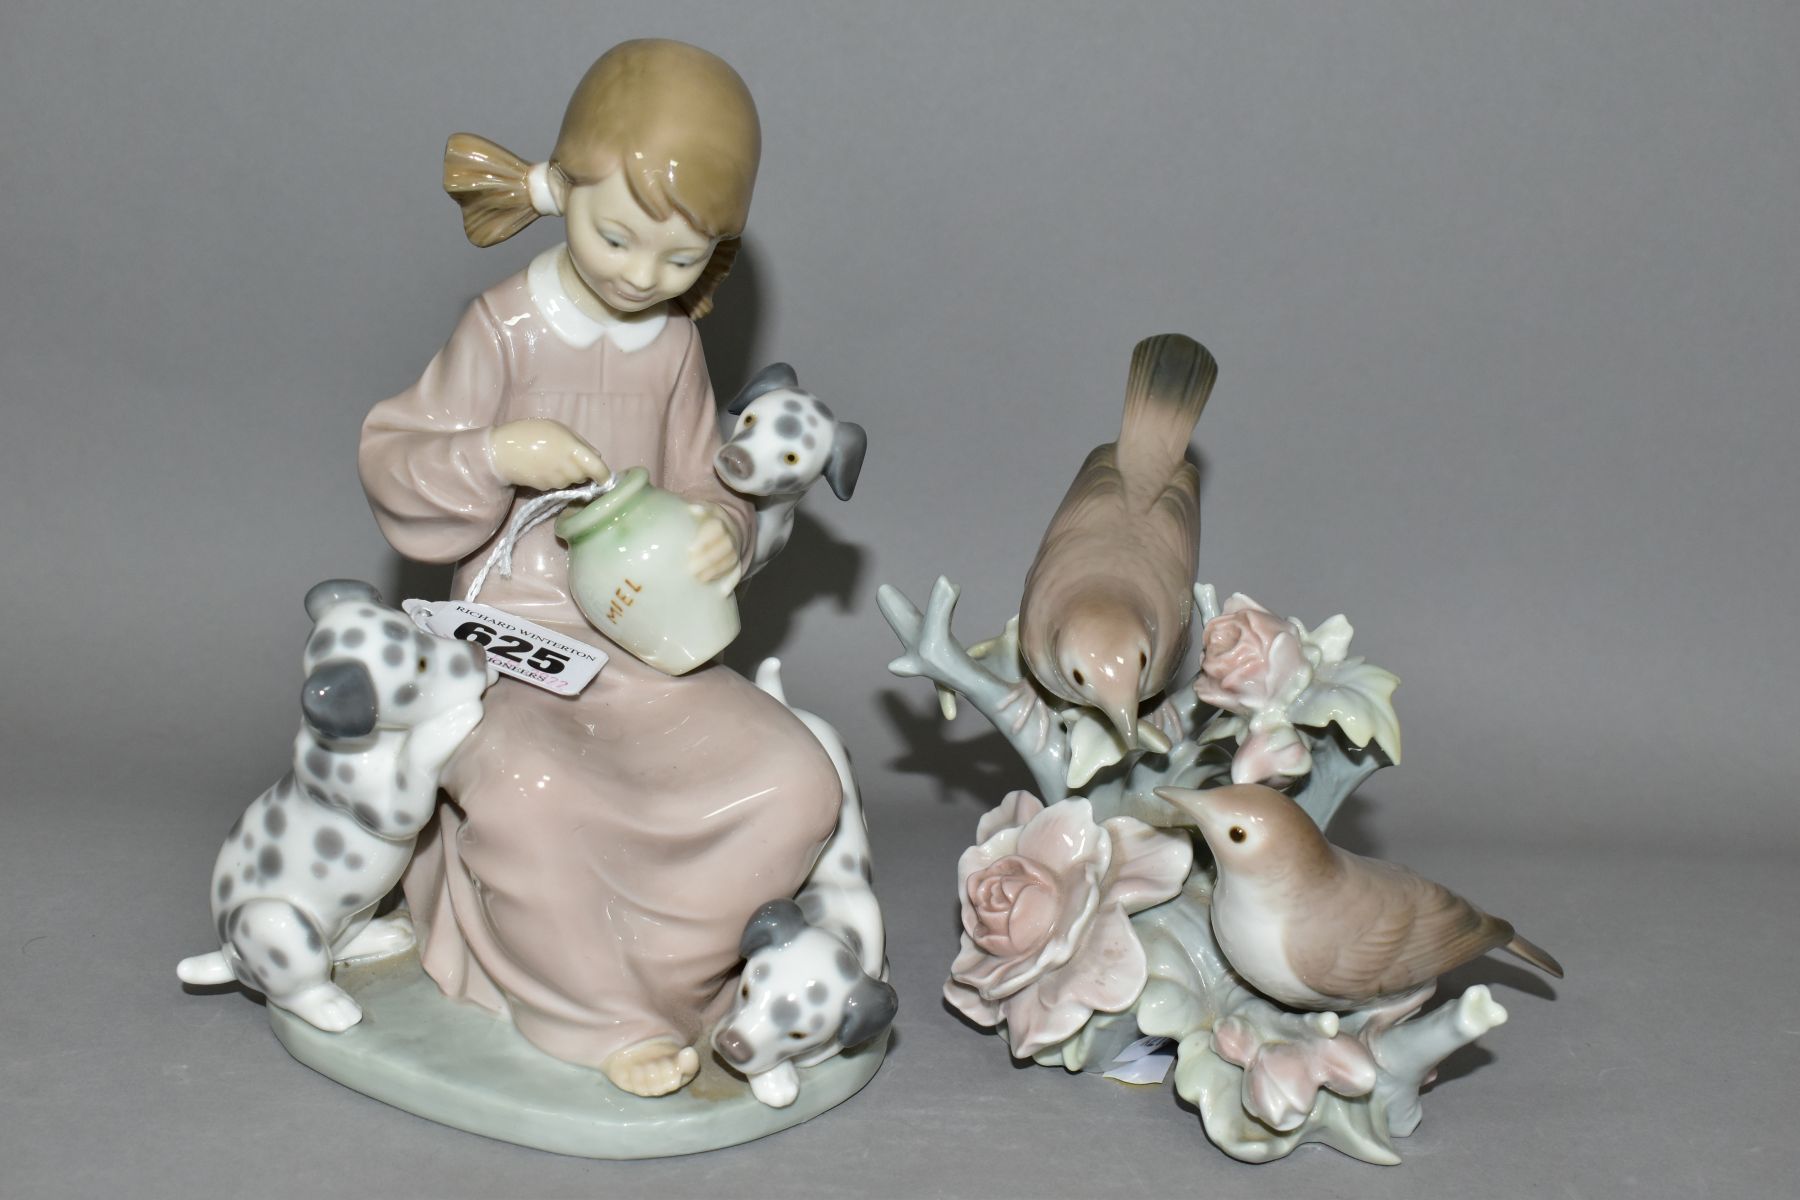 A LLADRO SCULPTURE 'THE SWEET MOUTHED' No 1248, designed by Juan Heurta in 1974, retired 1990,